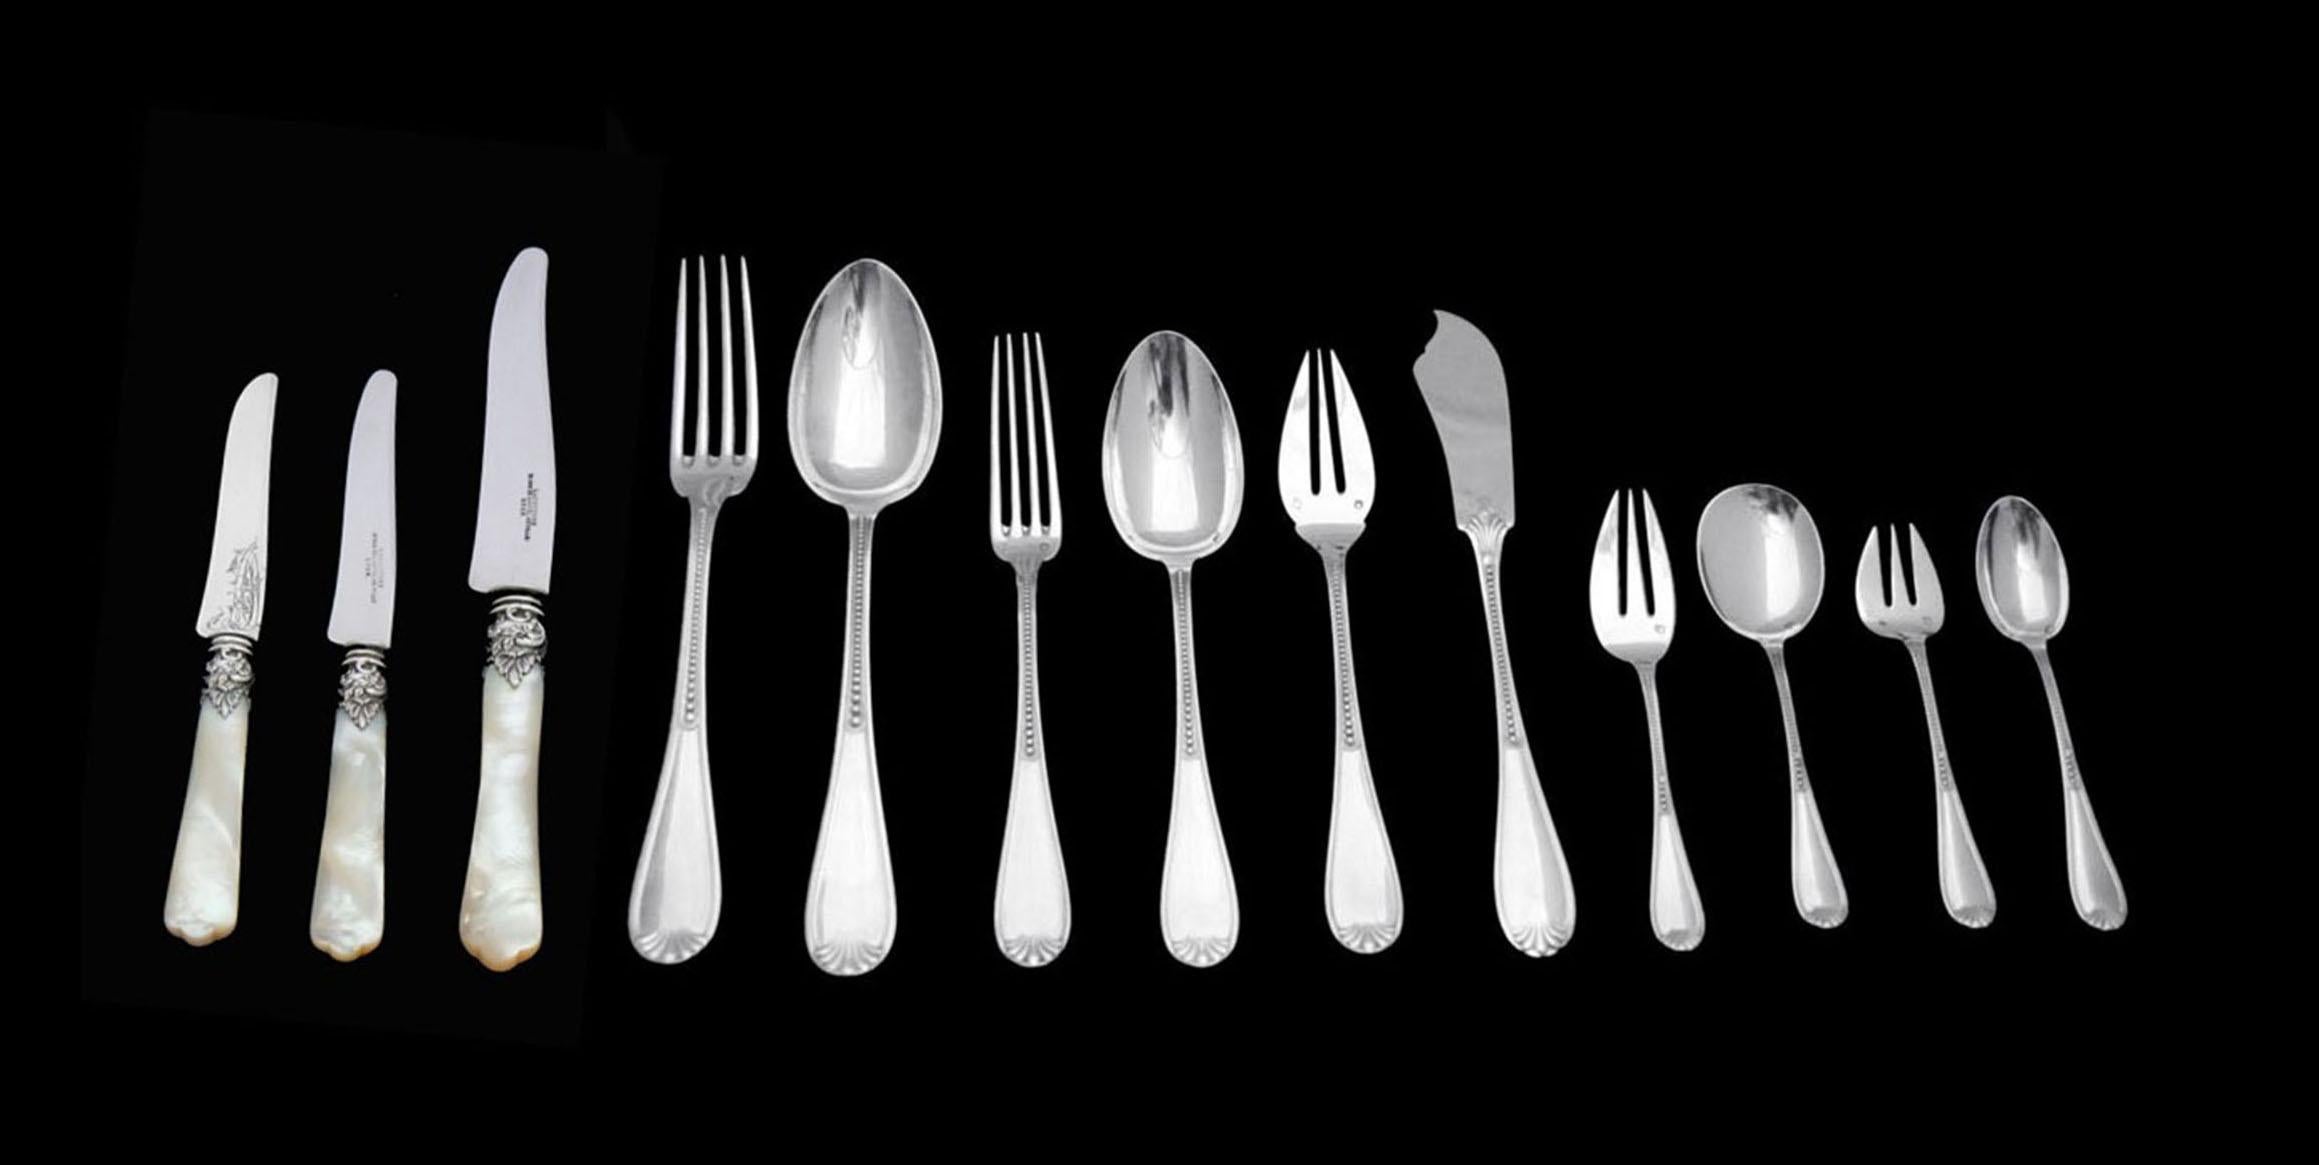 Bloch & Eschwege 273pc. Flatware Set – Description 1st Dibs
Direct from Paris, A Stunning 273pc. Privately Commissioned Napoleon III Sterling Silver Flatware Set with Rare Mother-of-Pearl Handled Knives, Original 5 Drawer Lockable Storage Chest and